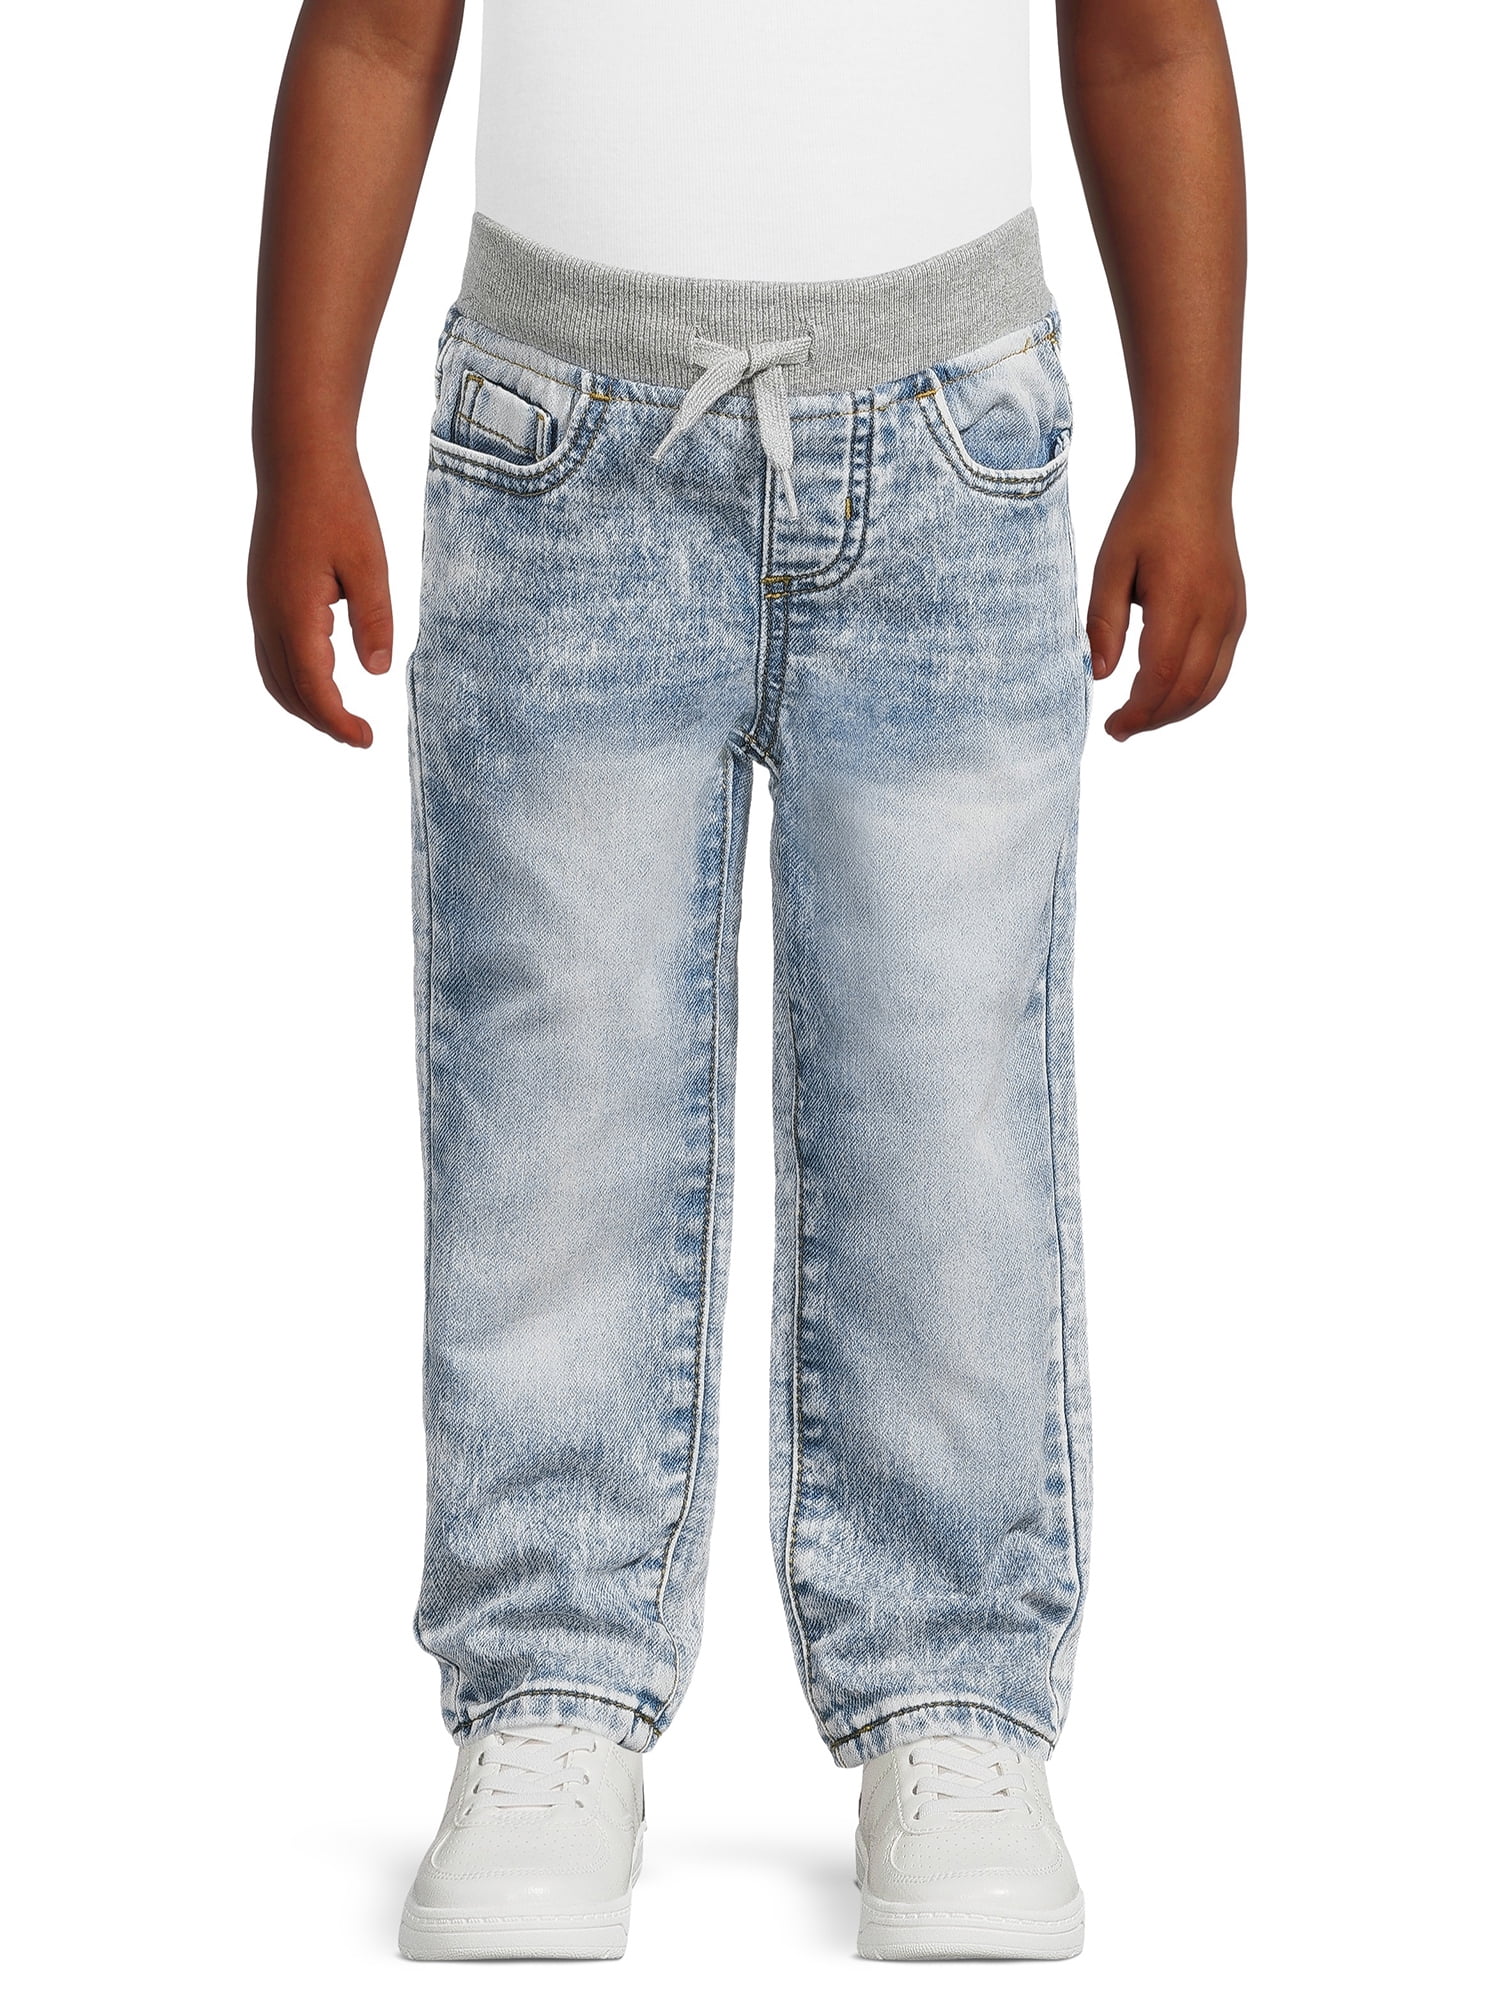 Nation Boys\' Wonder 12M-5T Knit Denim Sizes Baby Toddler Jeans, and